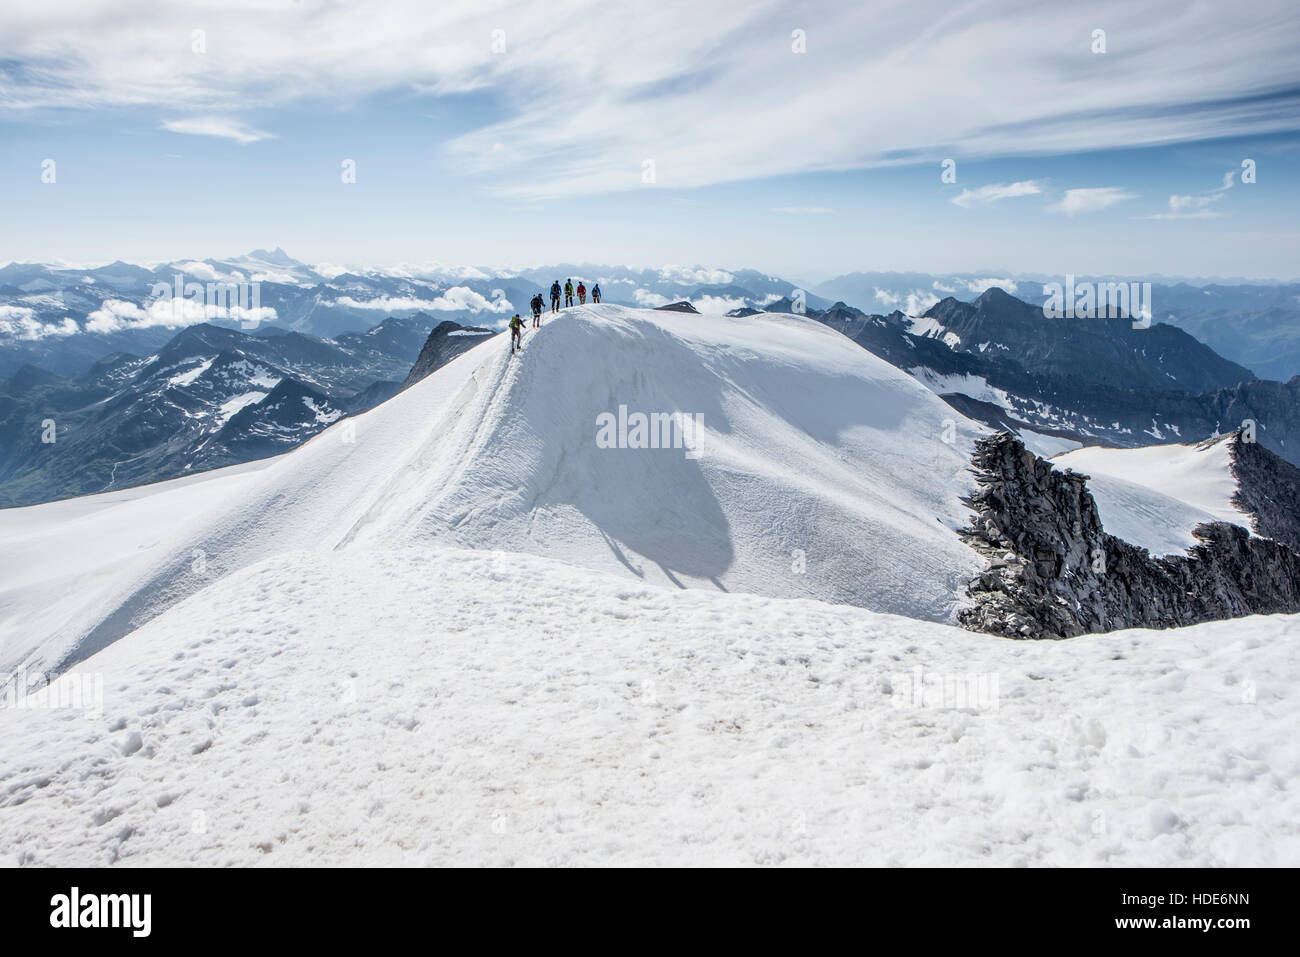 Group of climbers roped together climbing the snowy slope of the ...